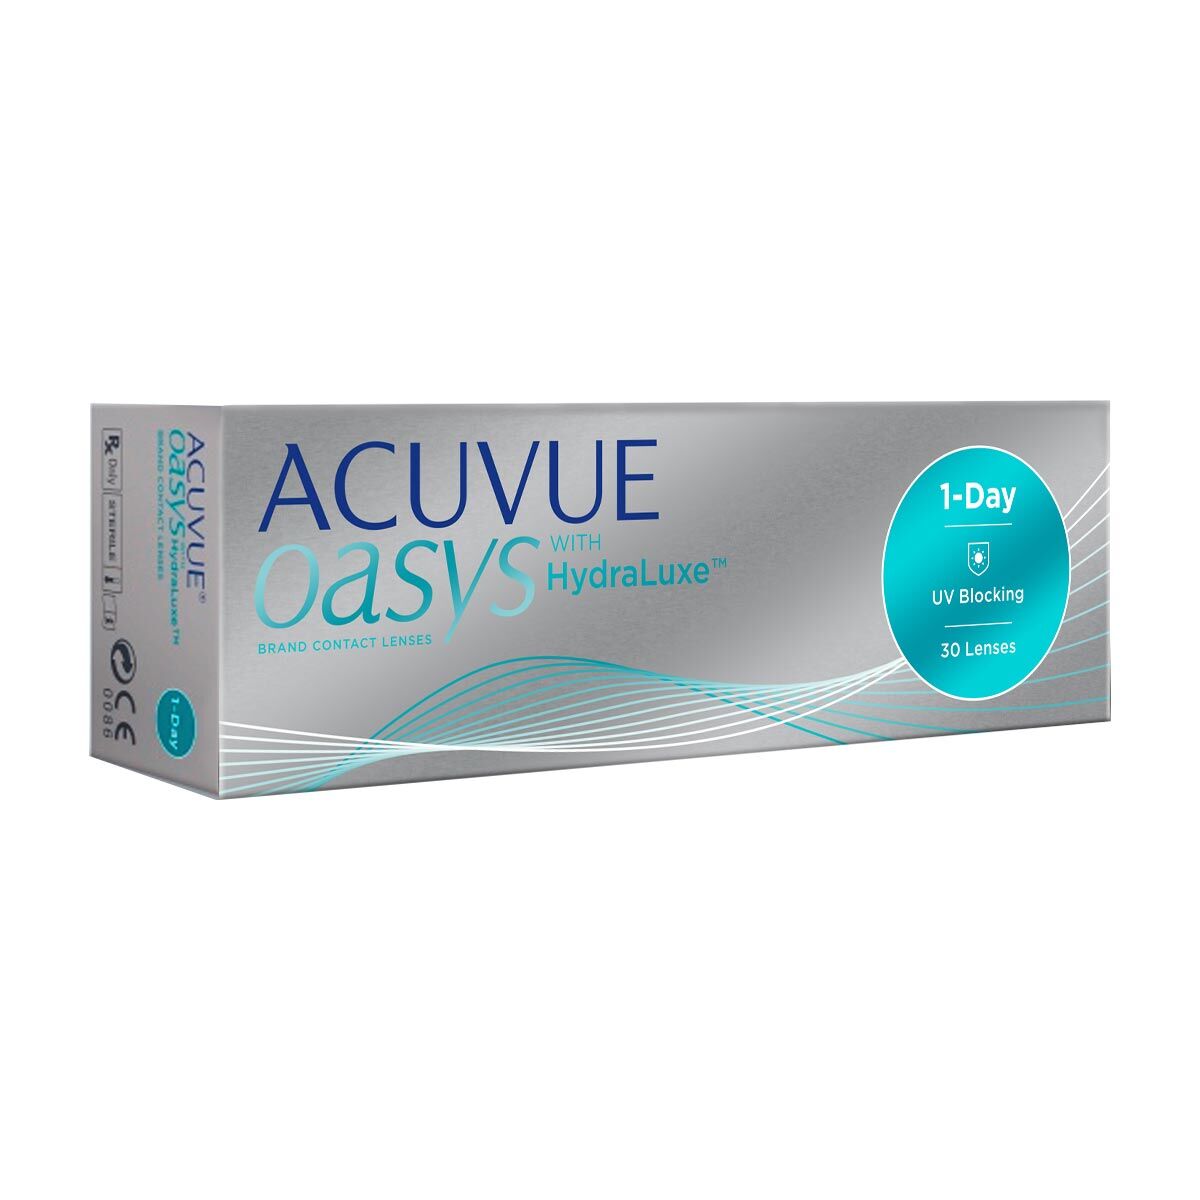 ACUVUE Oasys 1 Day +0.50